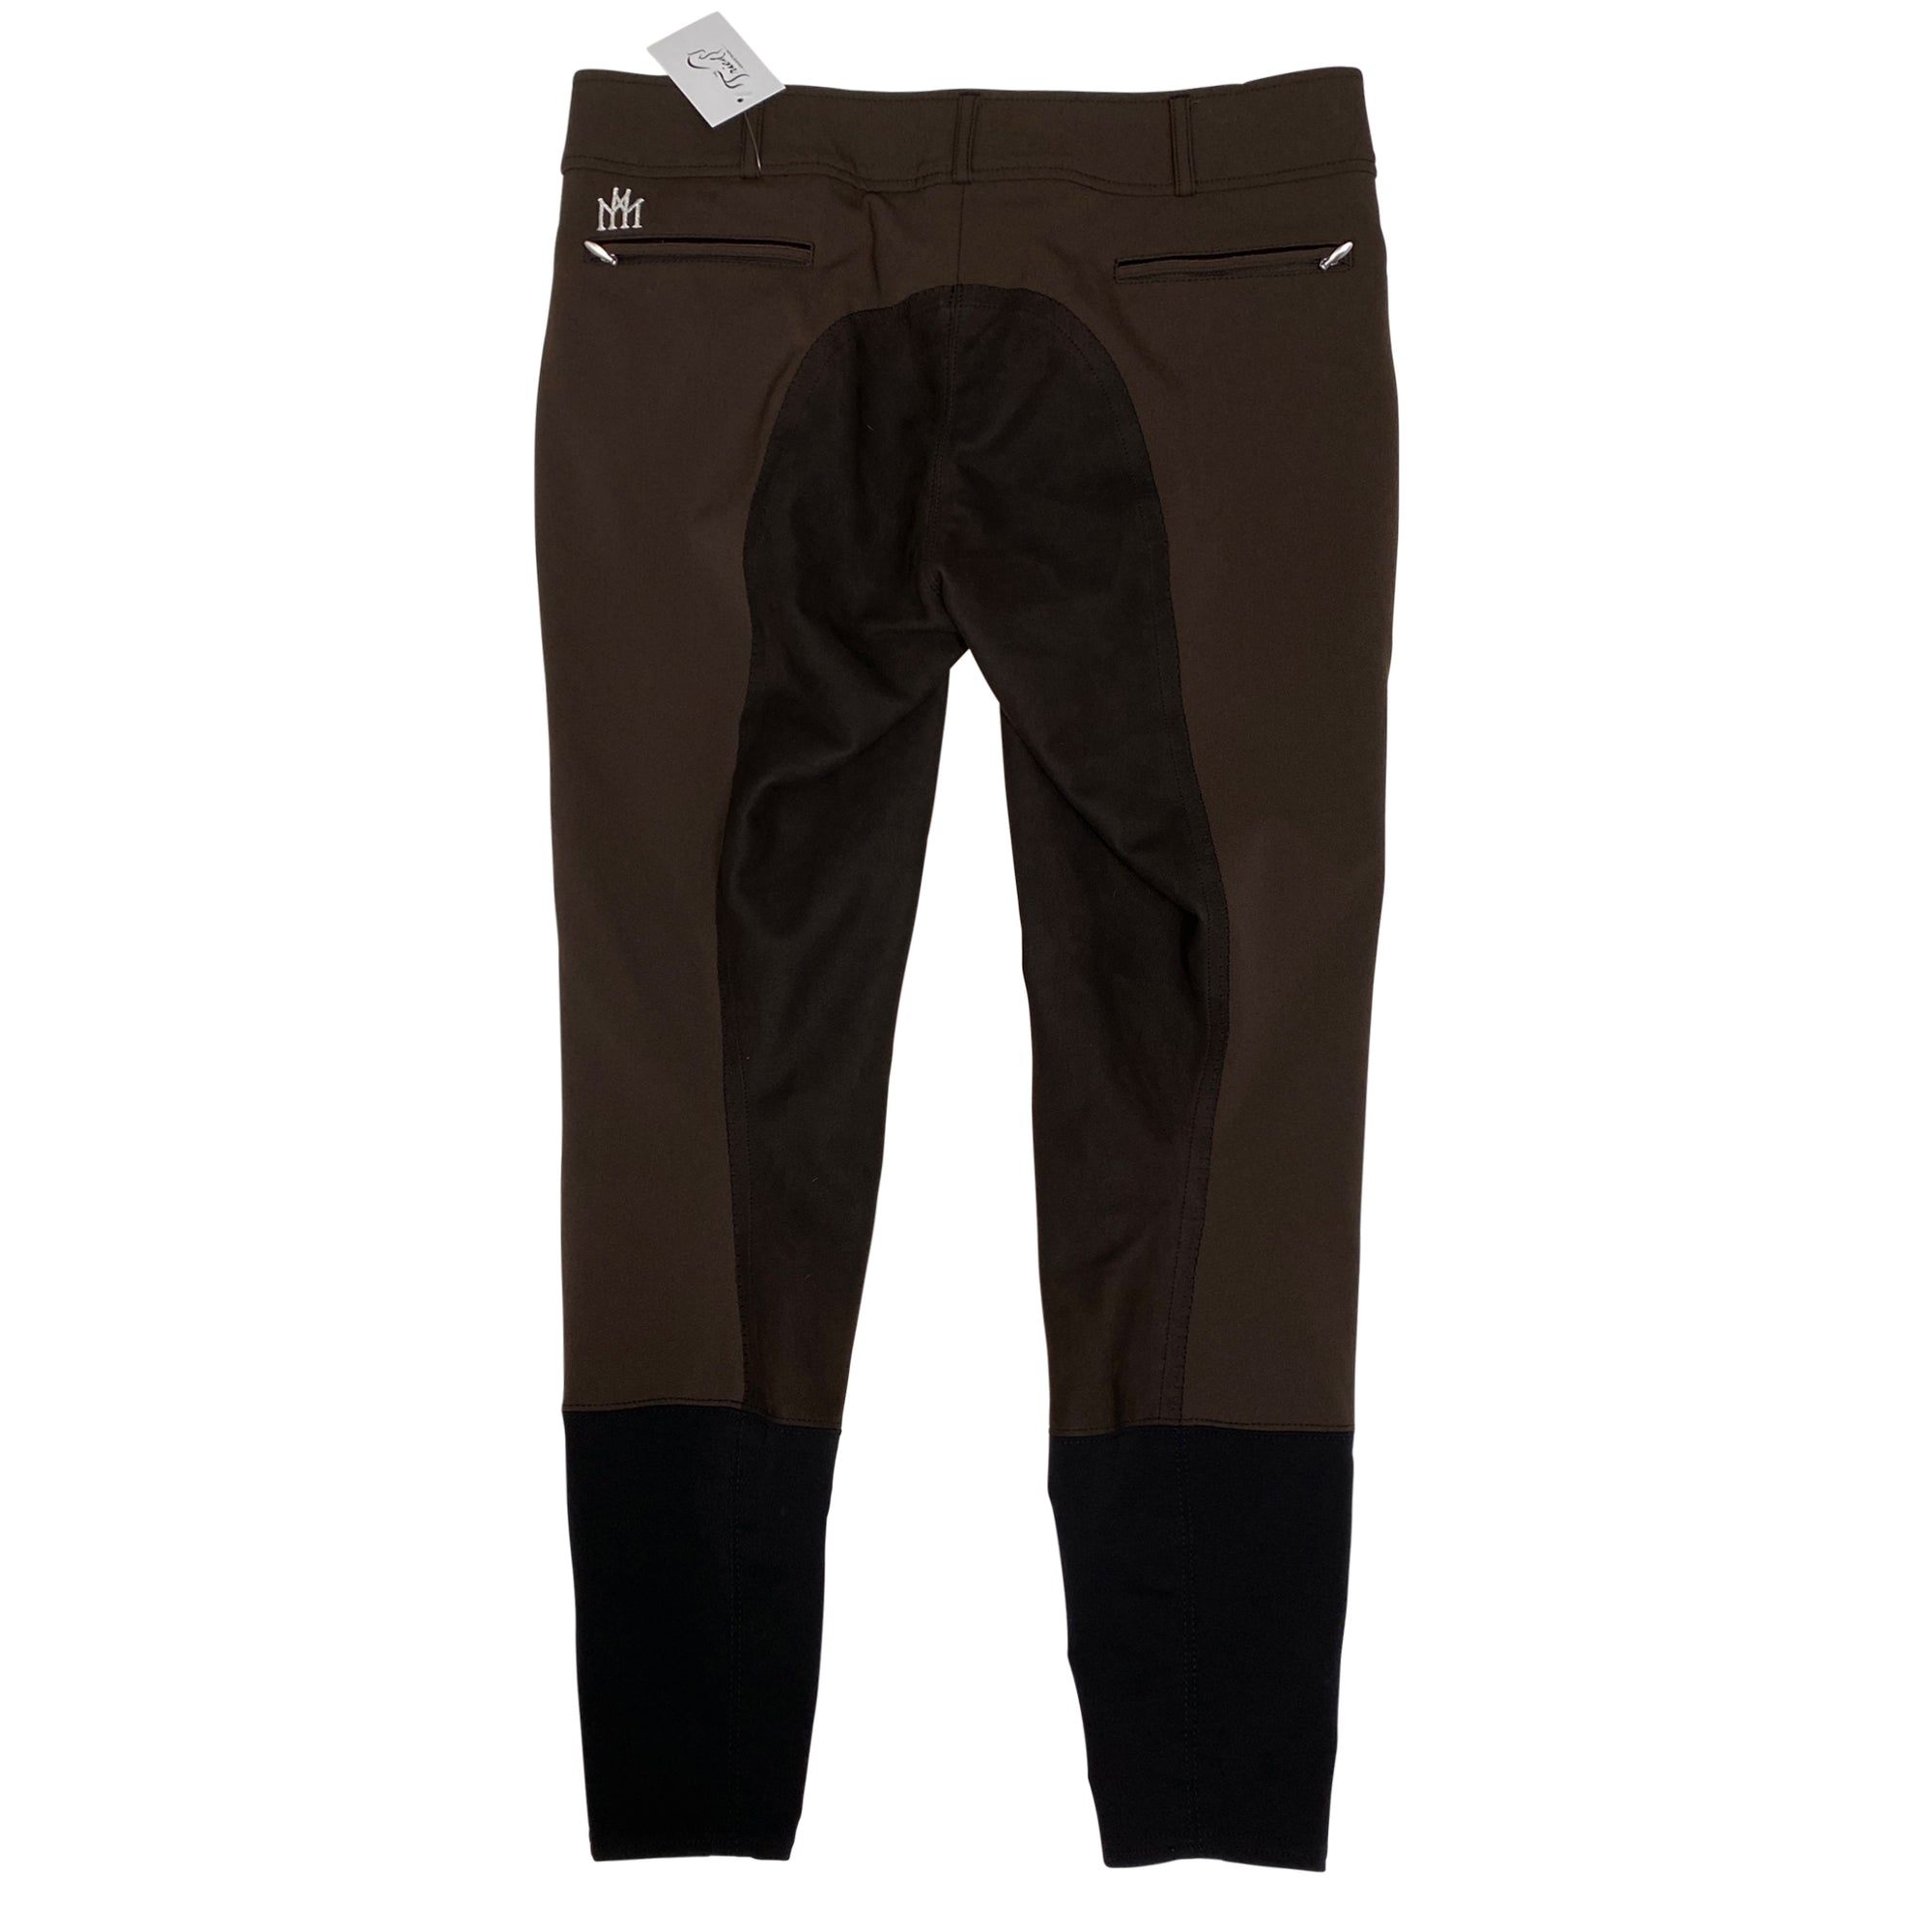 Mastermind Full Seat Breeches in Chocolate